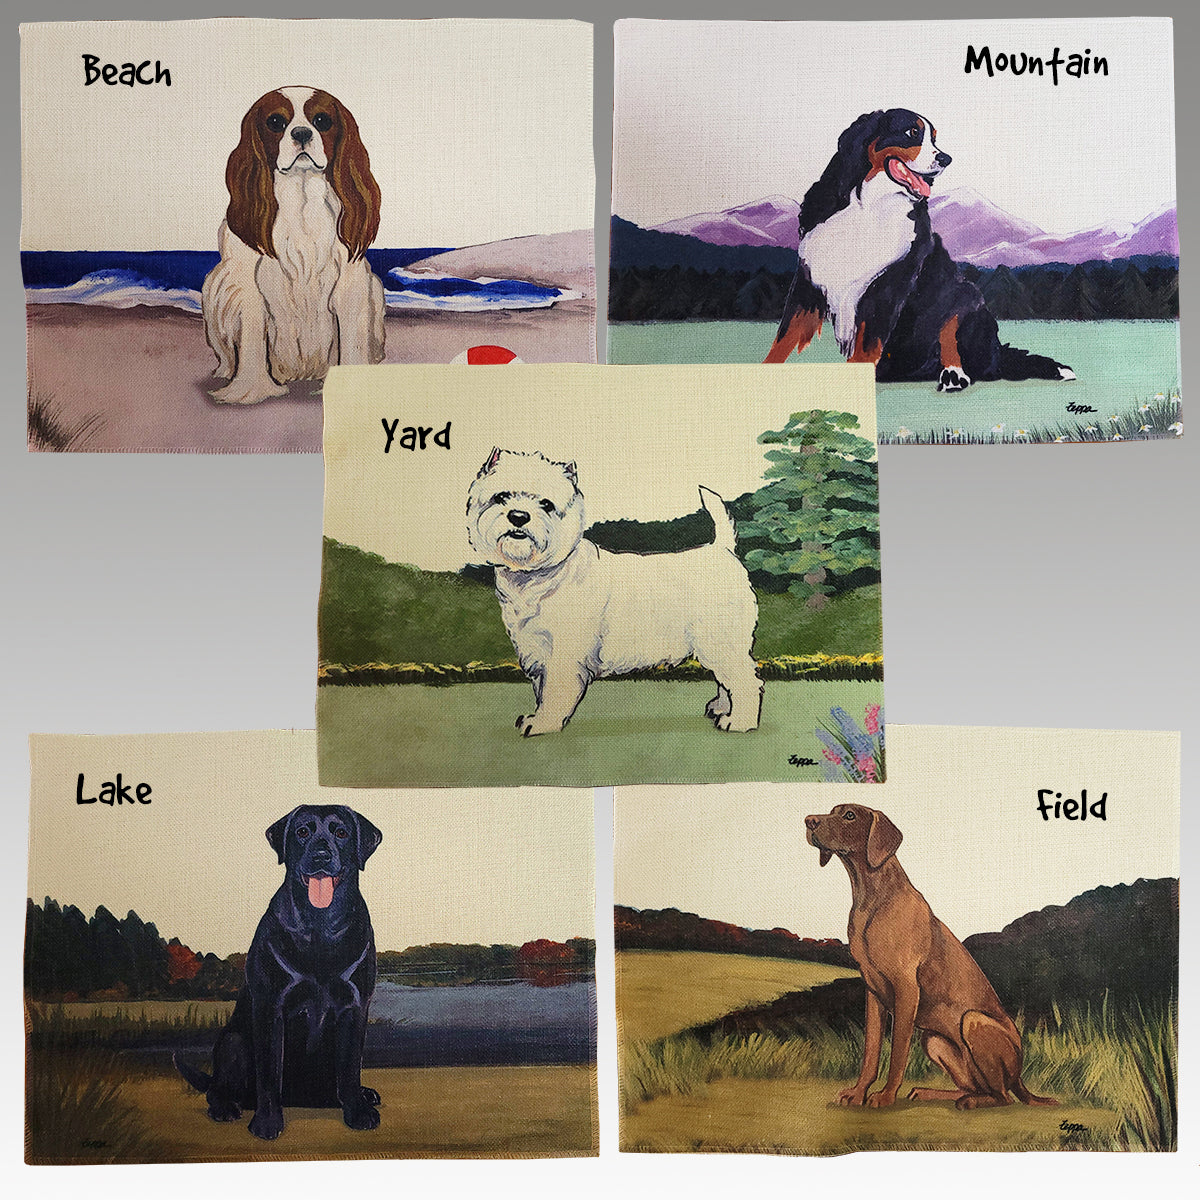 Treeing Walker Coonhound Scenic Placemats